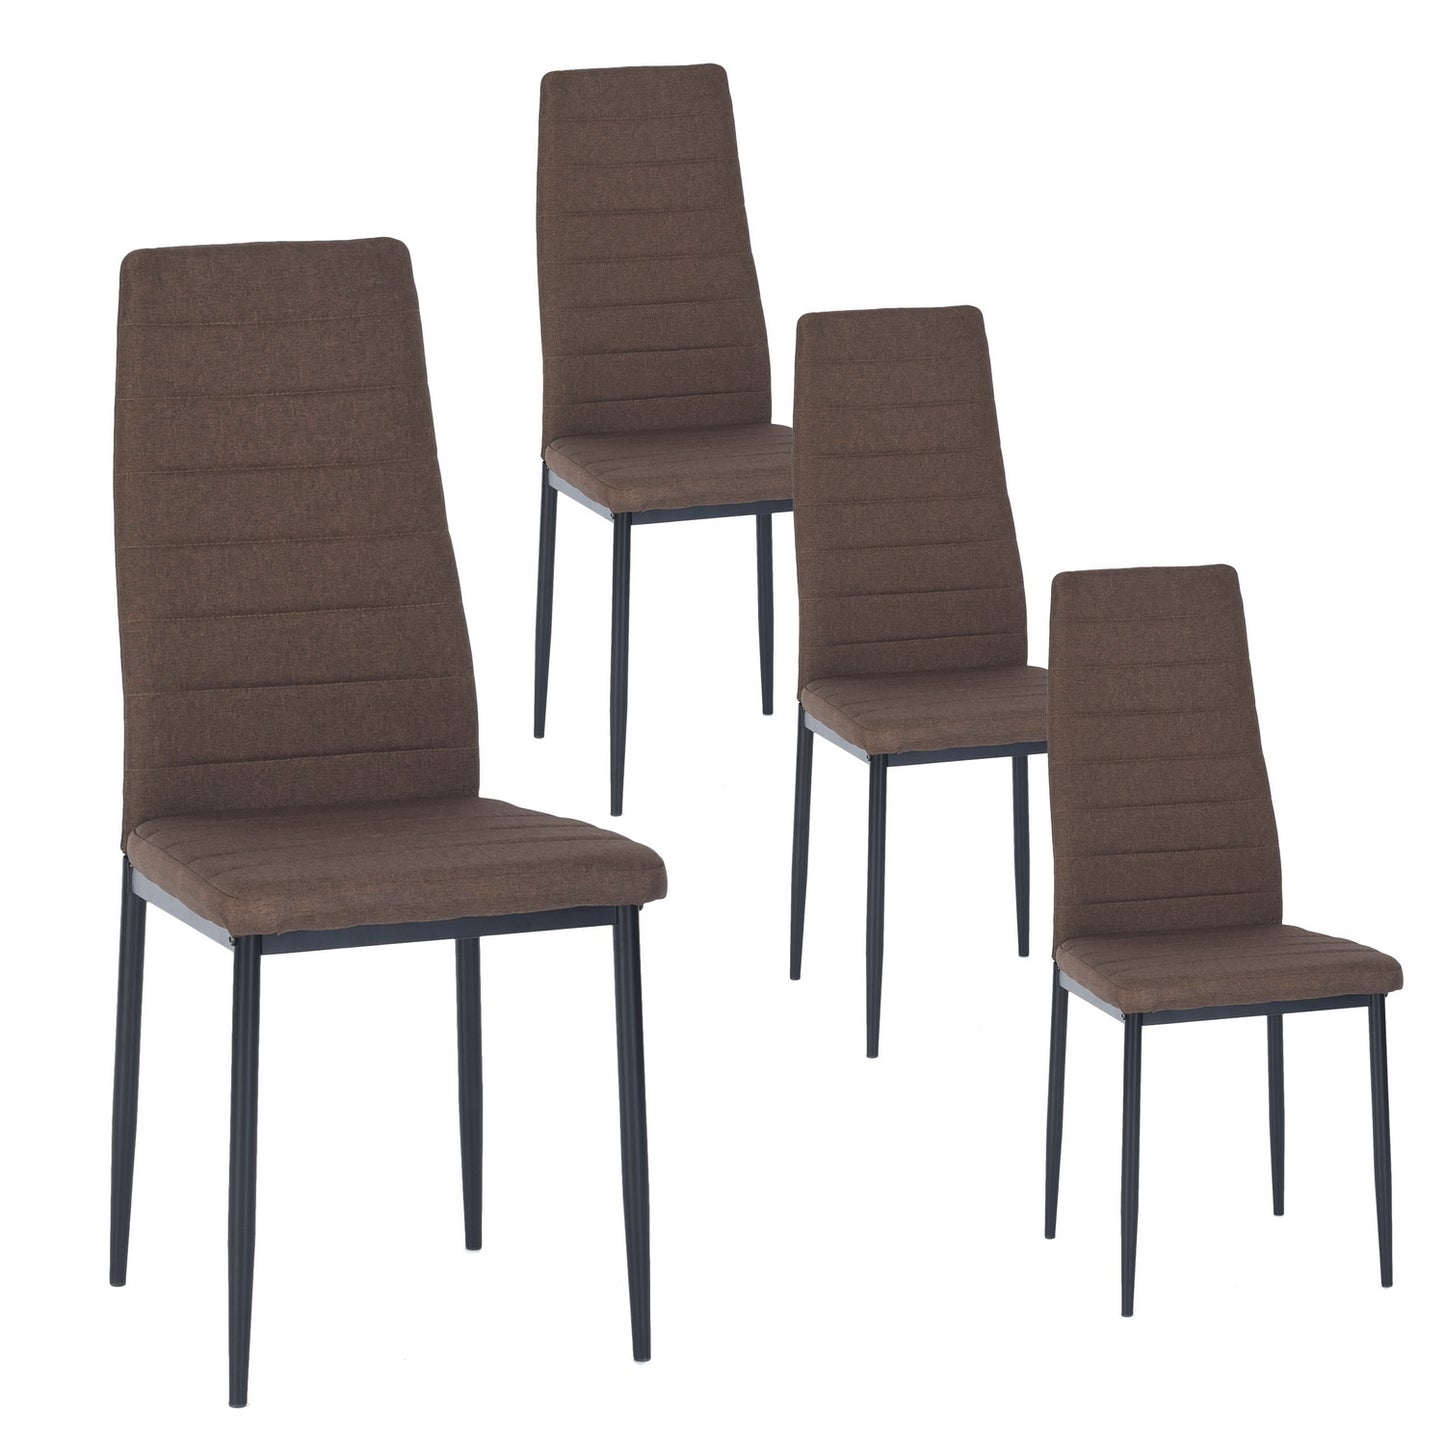 ANN Fabric Upholstered Side Chairs (Set of 4)